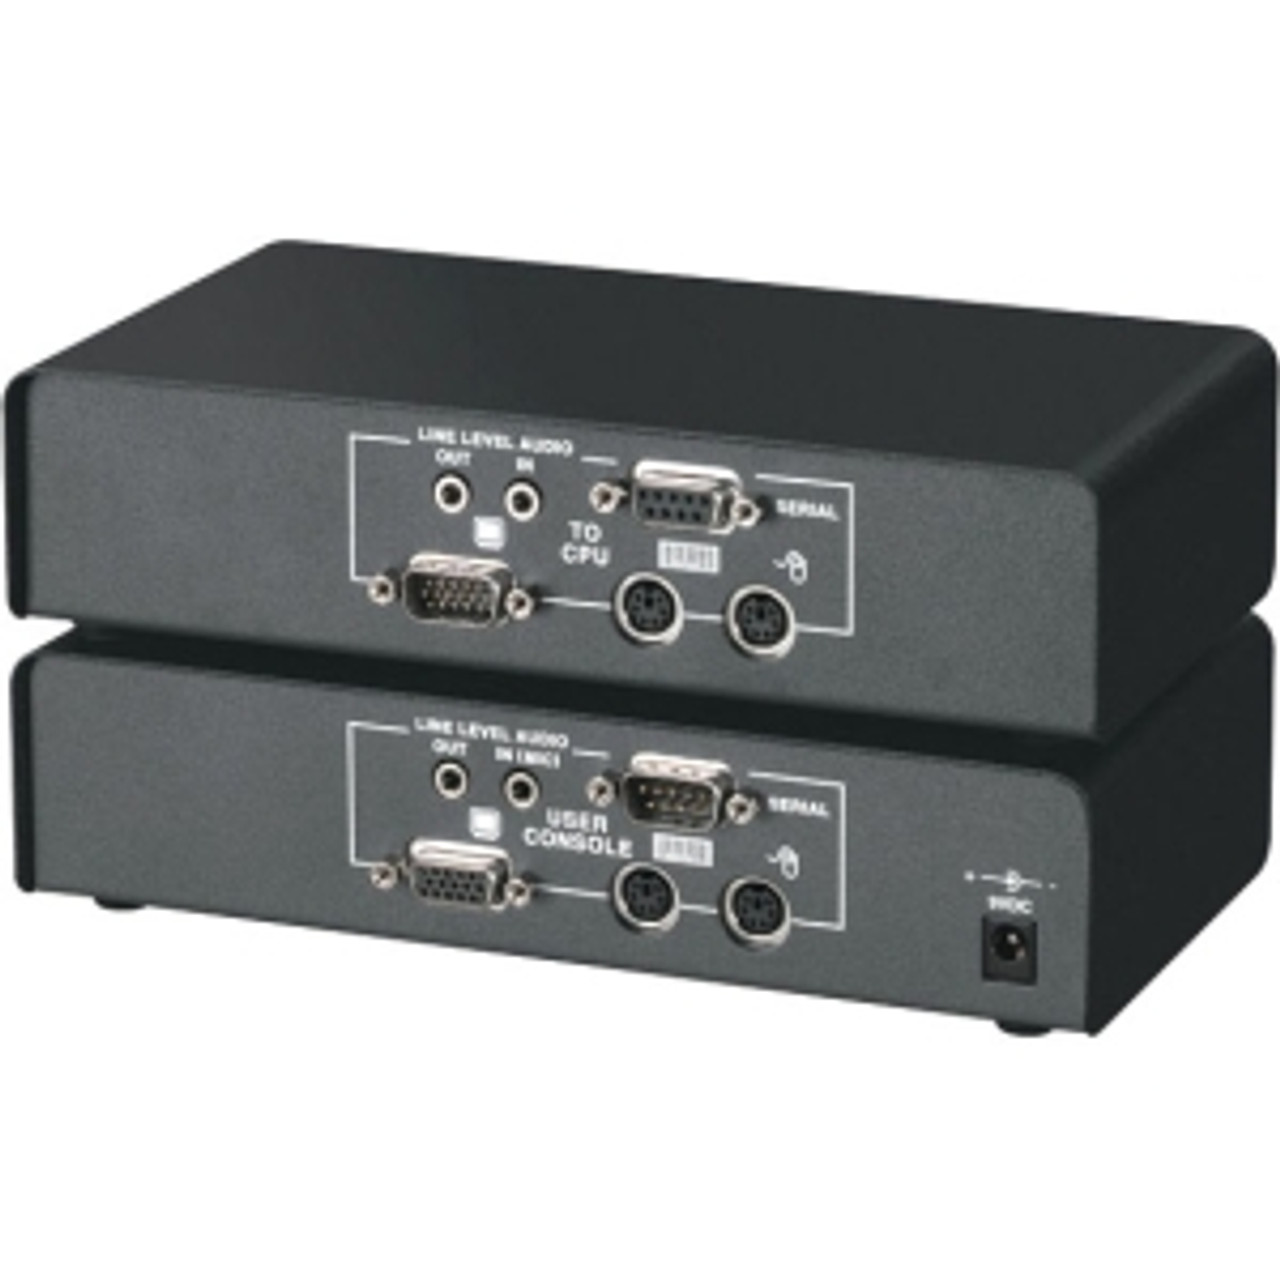 ACU1022A Black Box ServSwitch CAT5 KVM Extender with Serial Extension and Ste